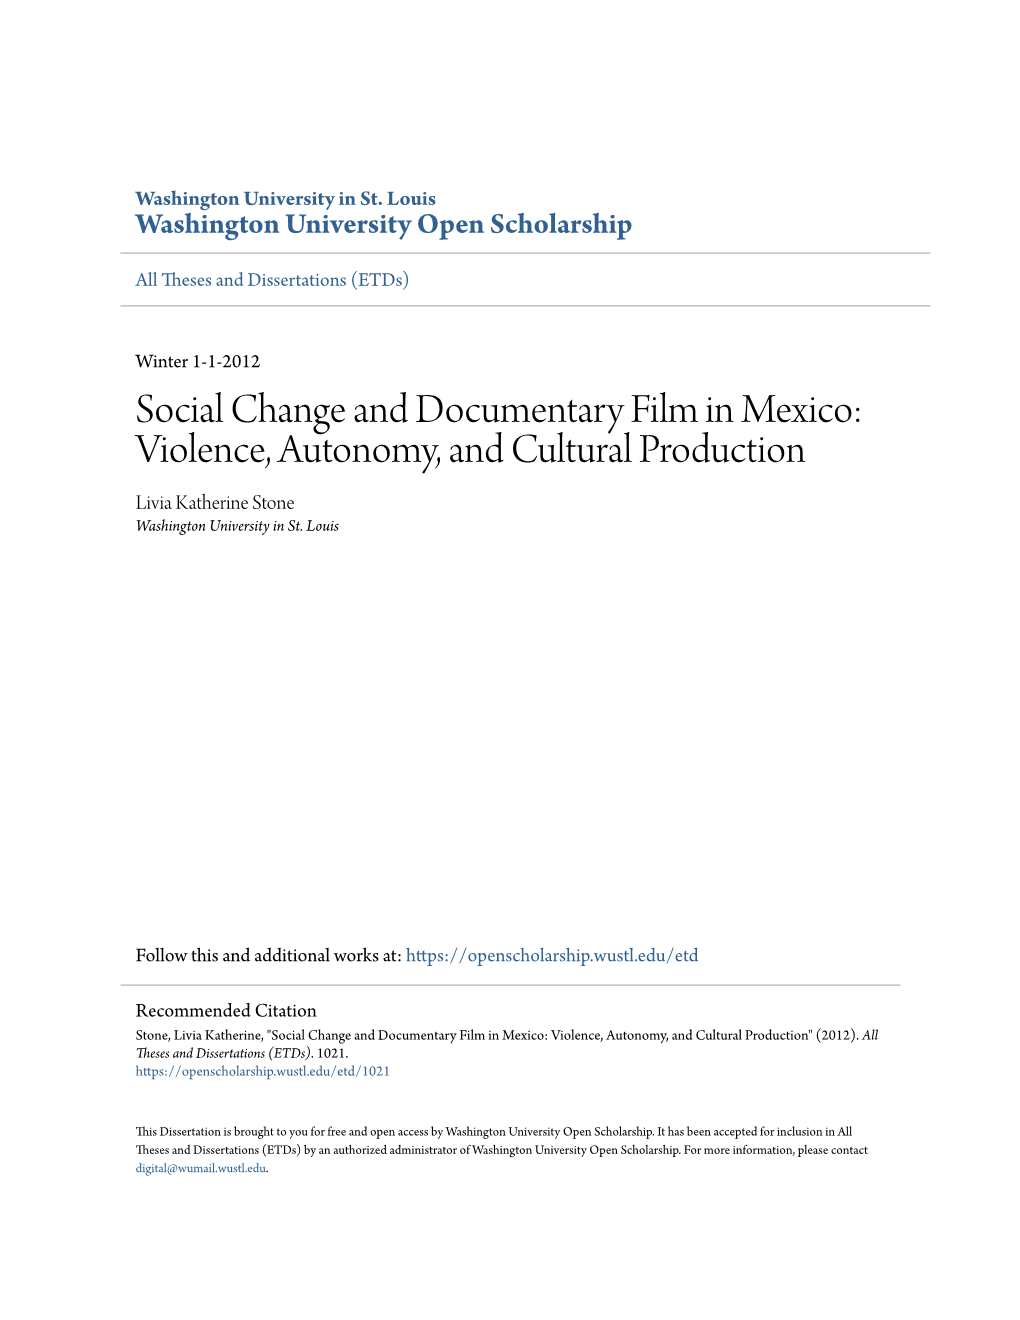 Social Change and Documentary Film in Mexico: Violence, Autonomy, and Cultural Production Livia Katherine Stone Washington University in St